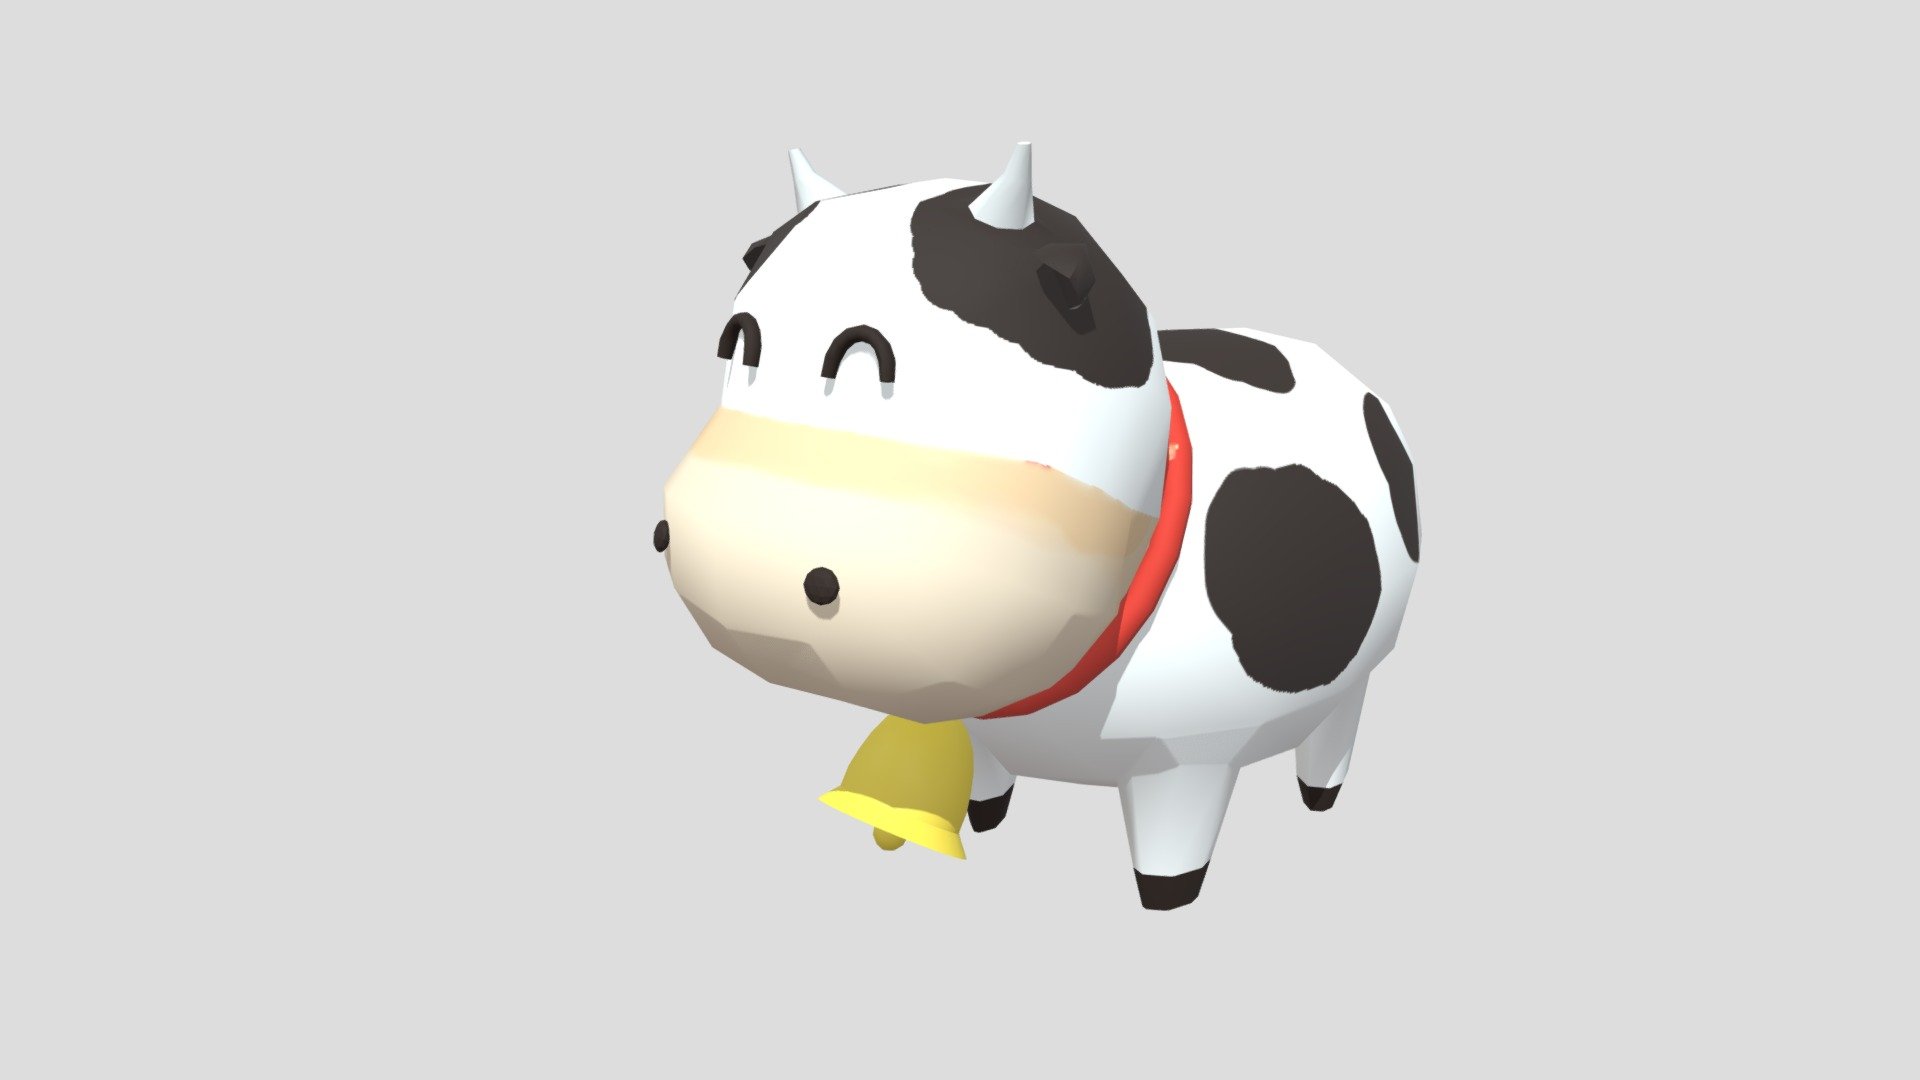 This is a practice work.
ref. https://skfb.ly/opD8u - Low Poly Cow - Download Free 3D model by tsutomu.saito 3d model